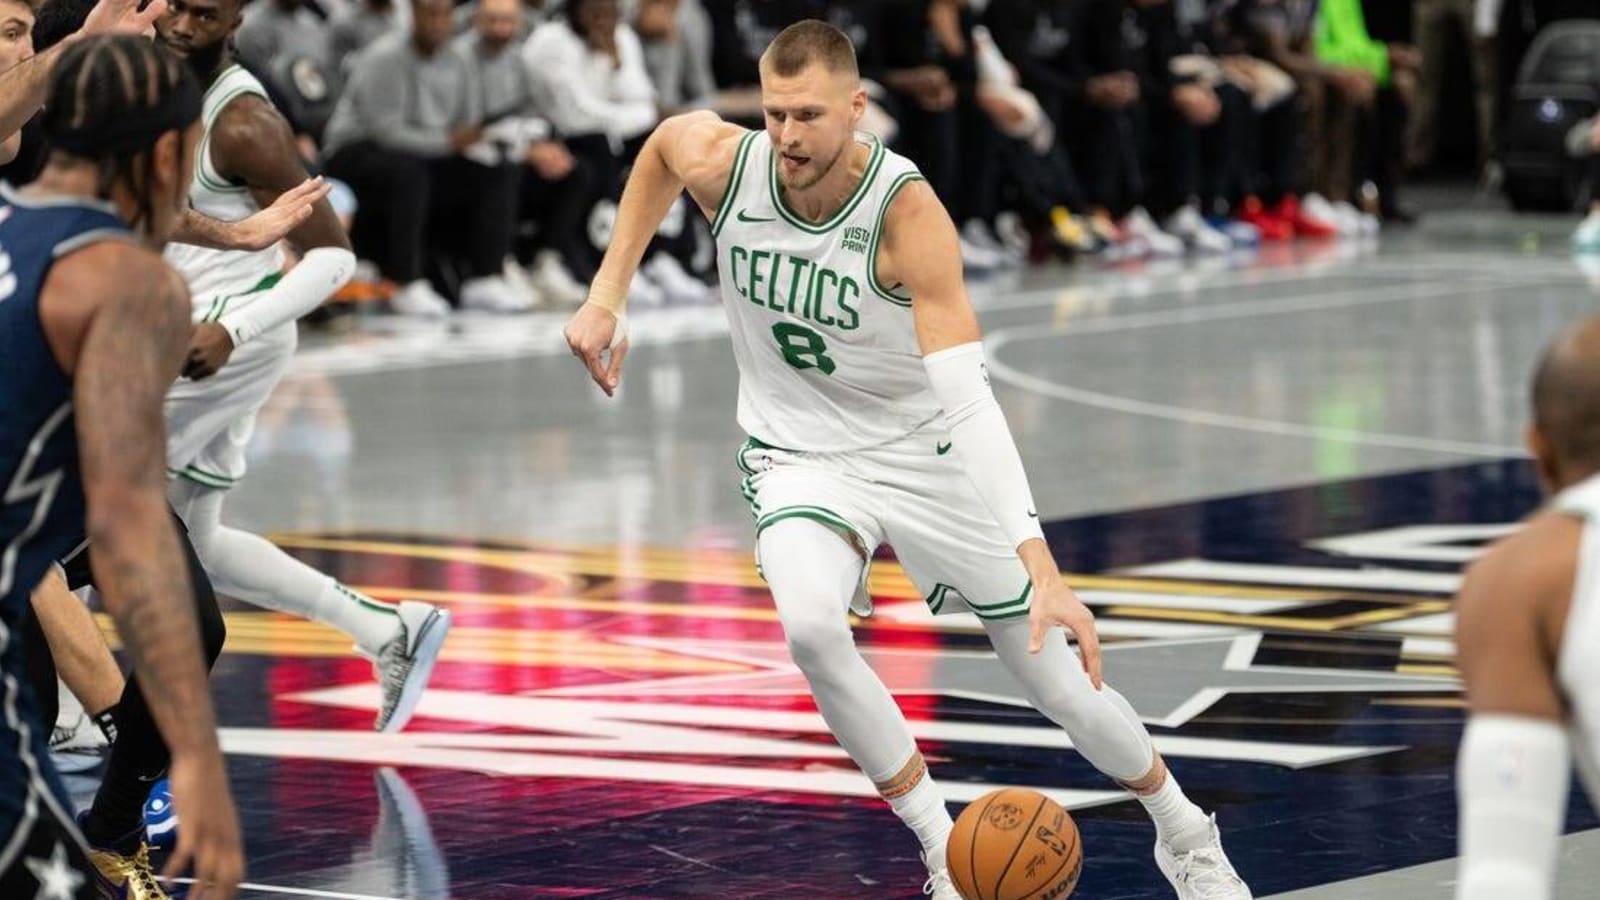 Celtics, facing Cavaliers, look to stay perfect at home